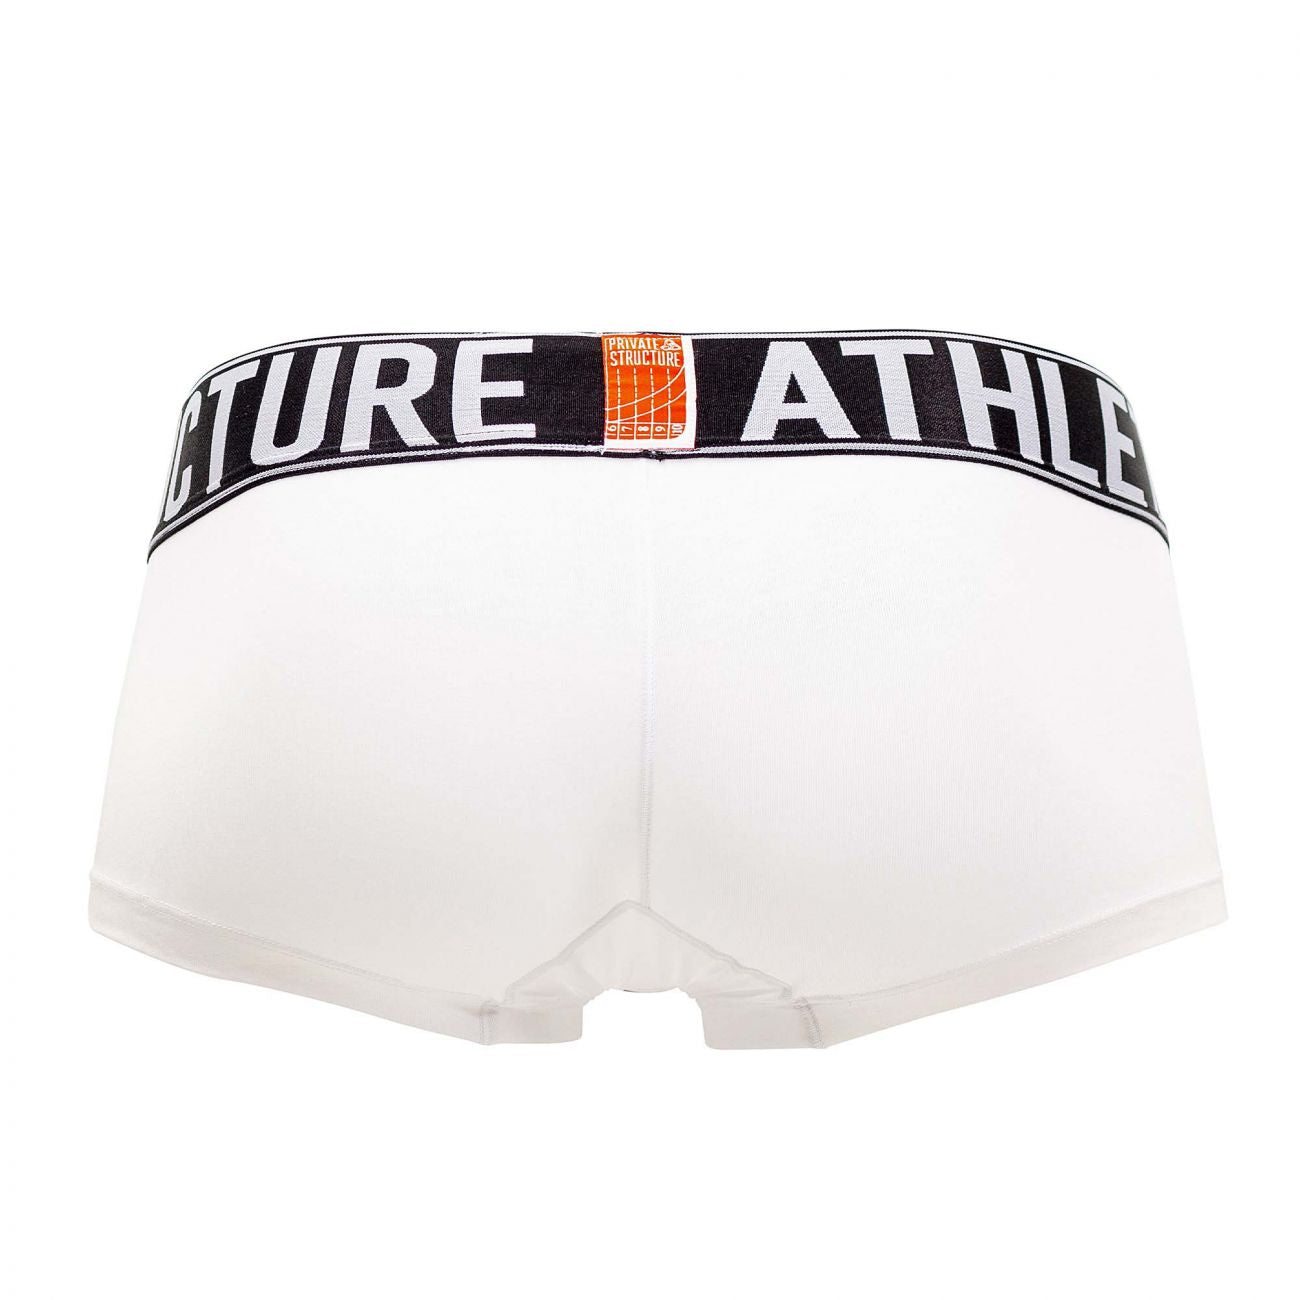 Private Structure BAUX4196 Athlete Trunks White